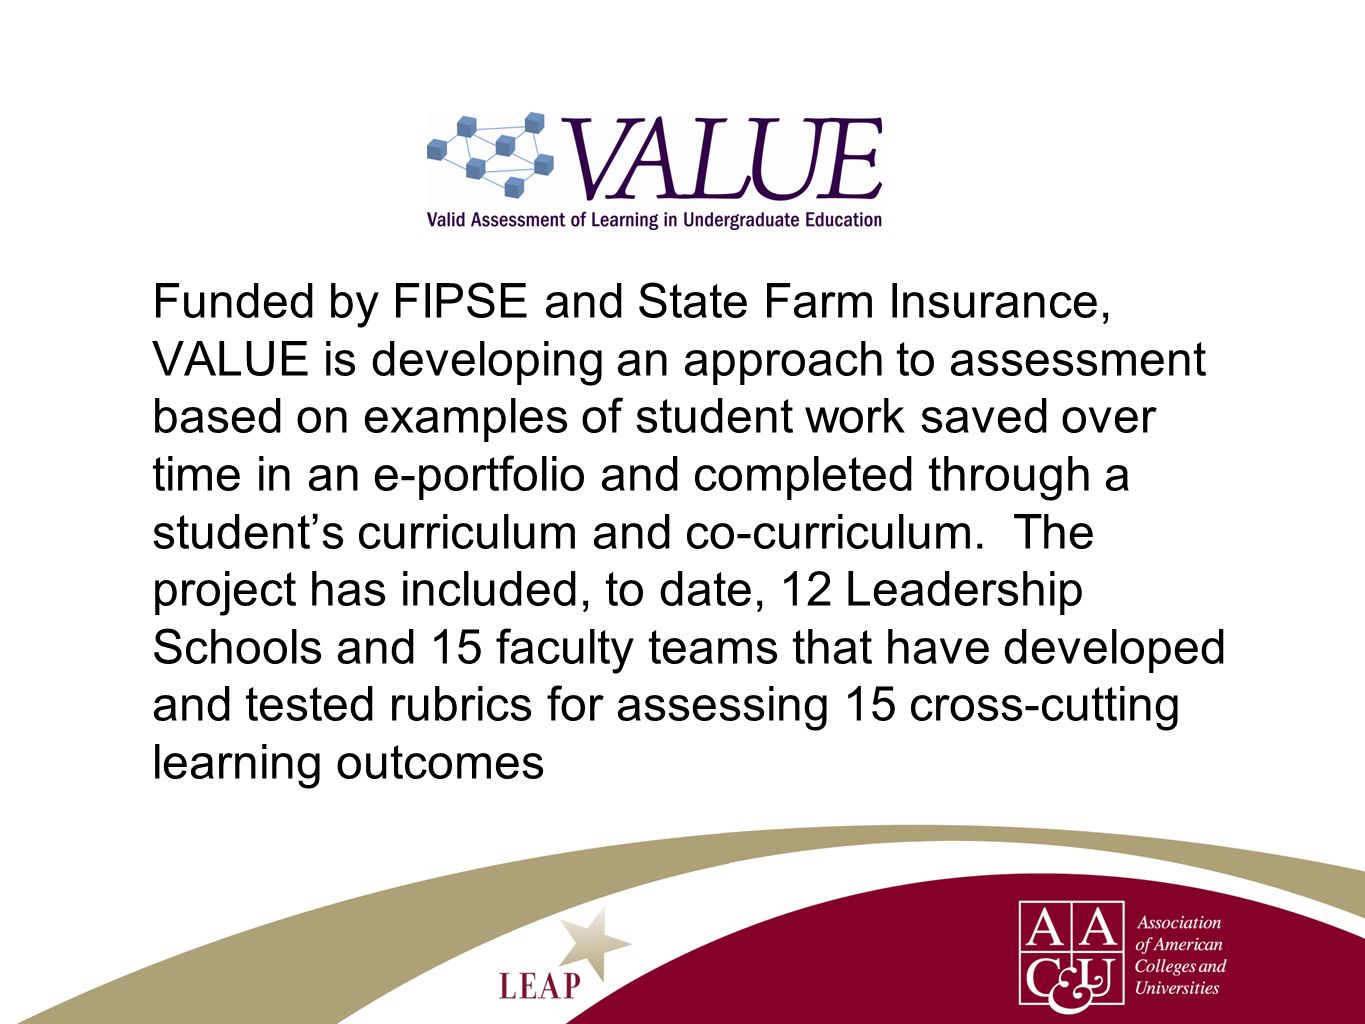 Funded by FIPSE and State Farm Insurance, VALUE is developing an approach to assessment based on examples of student work saved over time in an e-portfolio and completed through a students curriculum and co-curriculum.